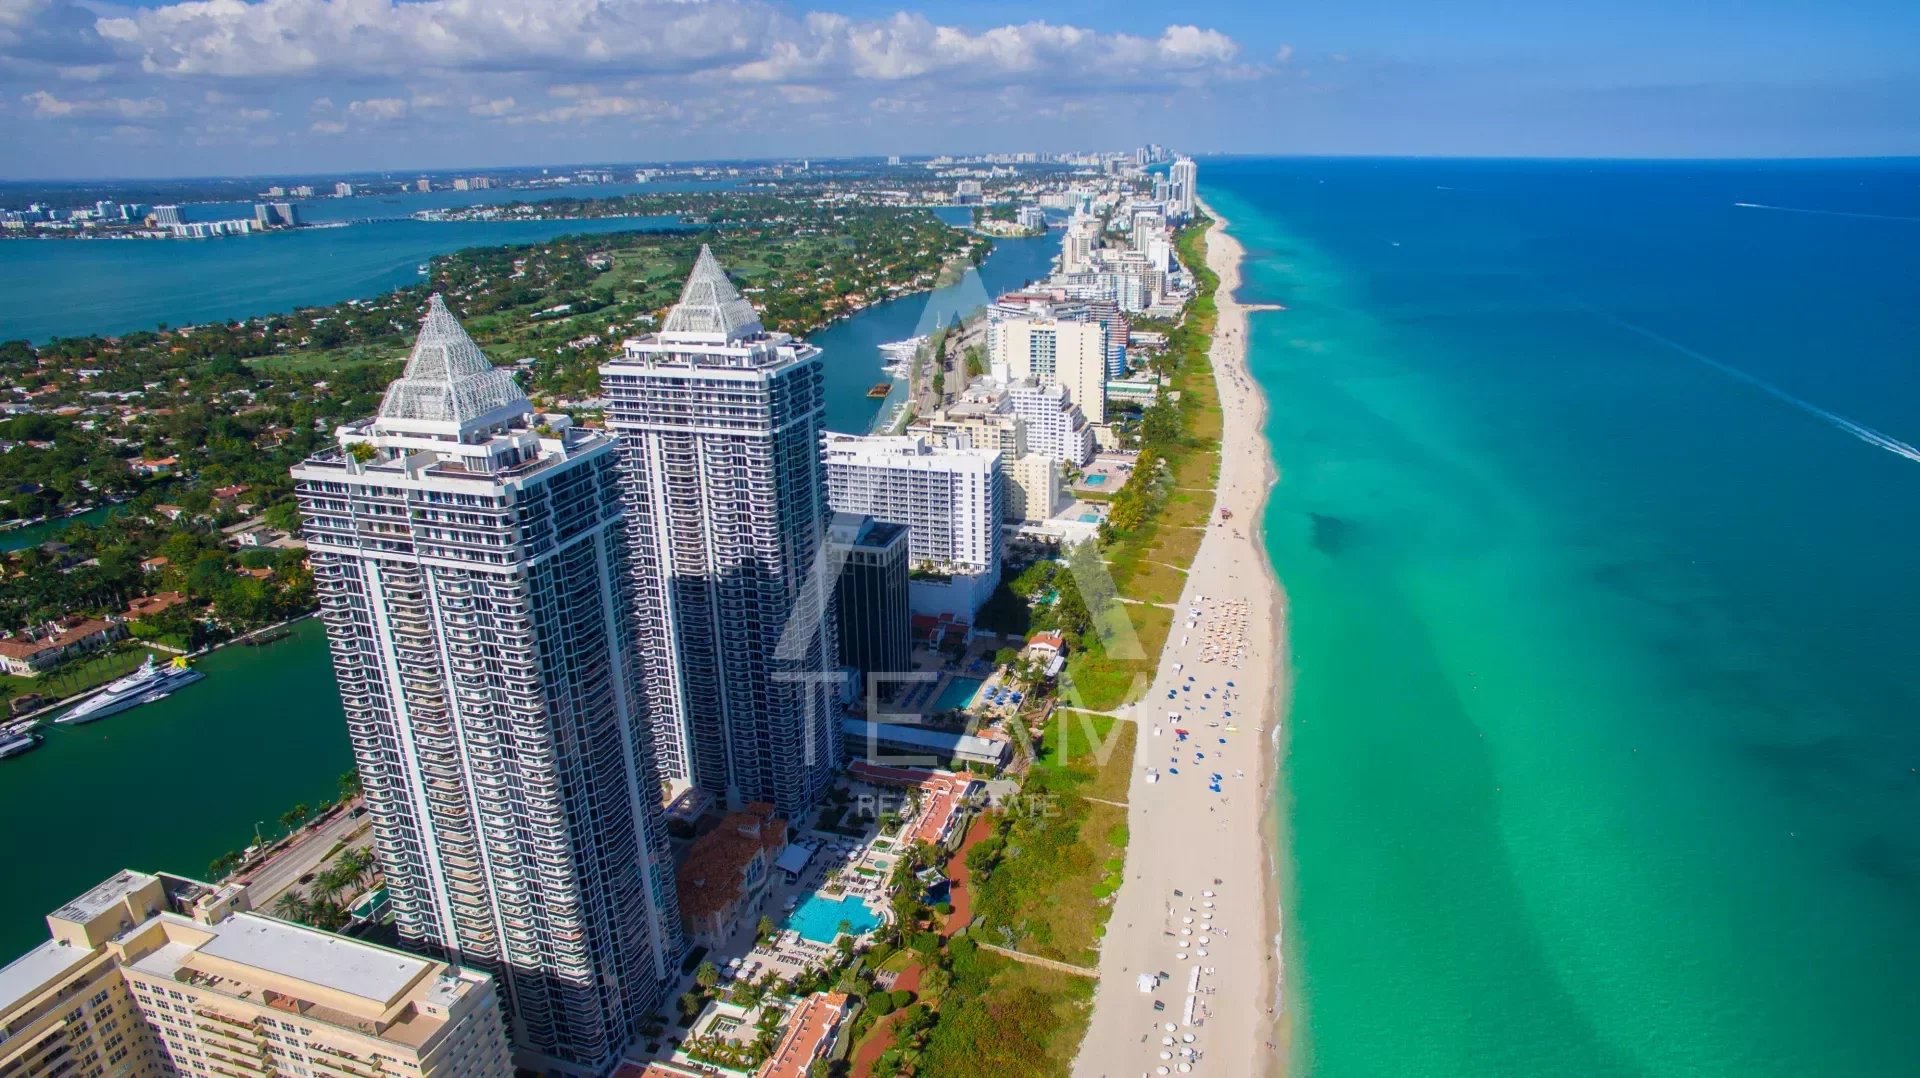 city,south,line,county,tourism,clouds,turquoise,video,aerial,sea,summer,scene,dade,miami,view,bird,above,angle,vacation,dock,landscapes,sky,sightseeing,flyover,wide,umbrella,footage,format,downtown,wa